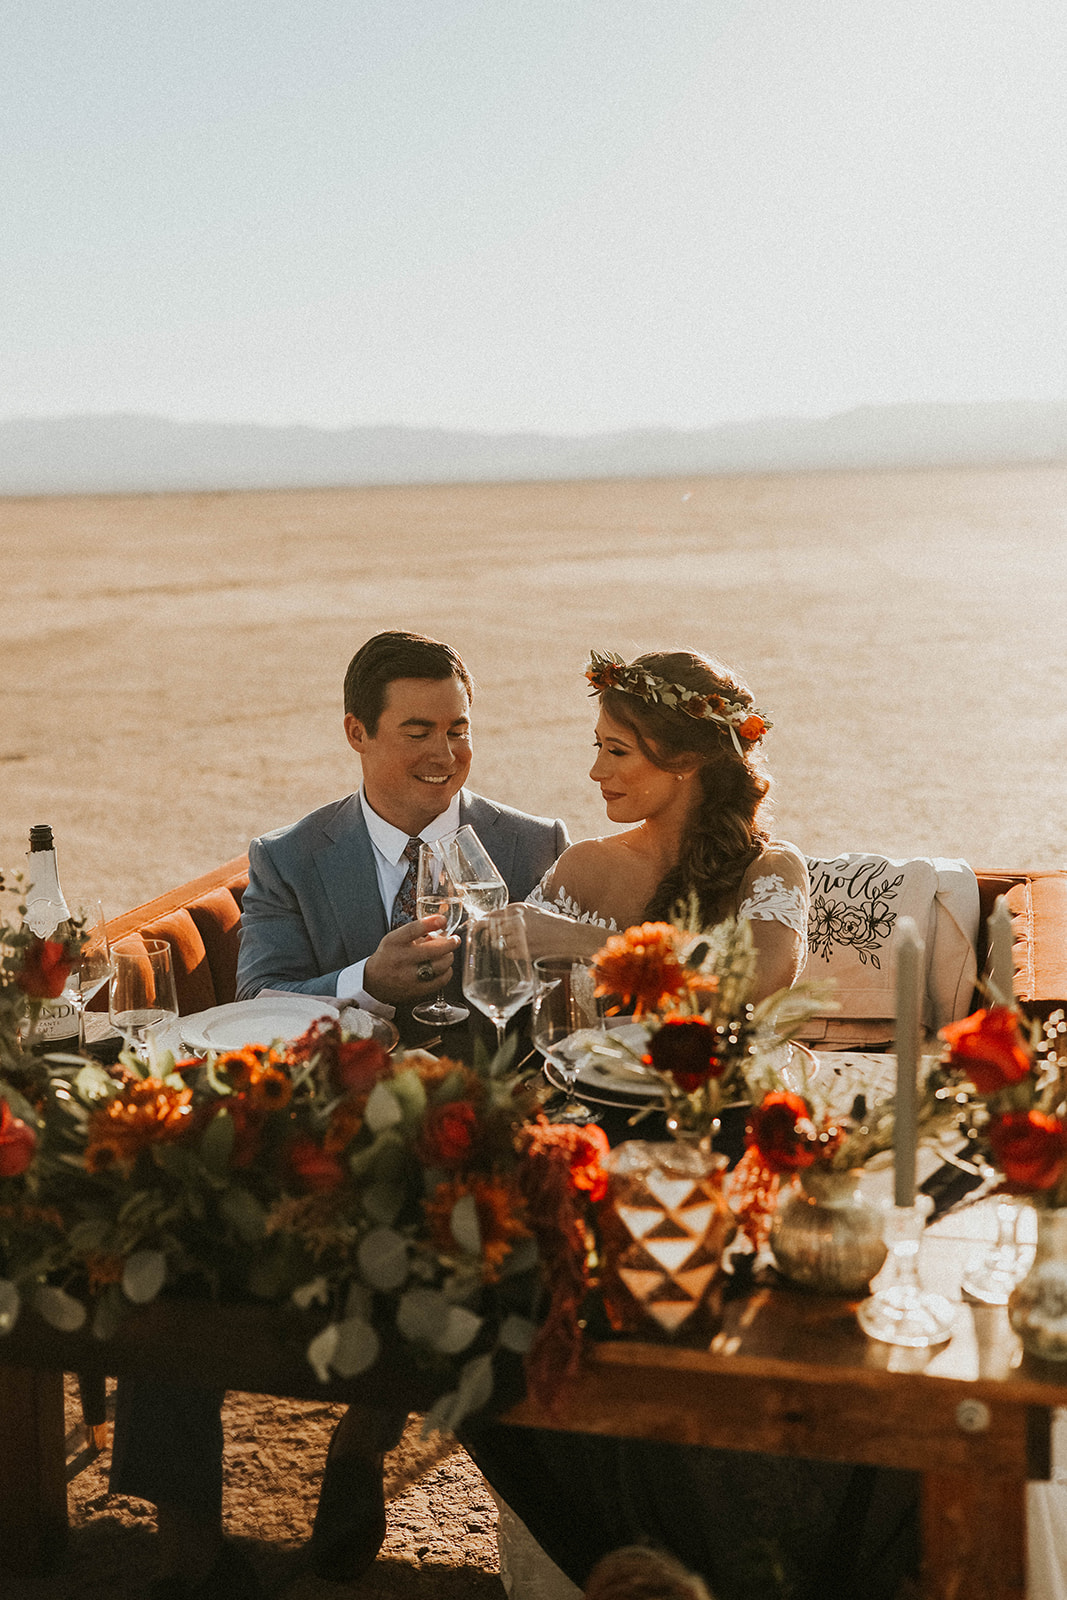 Newlyweds Having Champagne while Sitting at Dry Lake Bed Fall Inspired Elopement Sweetheart Table with Velvet Couch & Fall Inspired Floral 